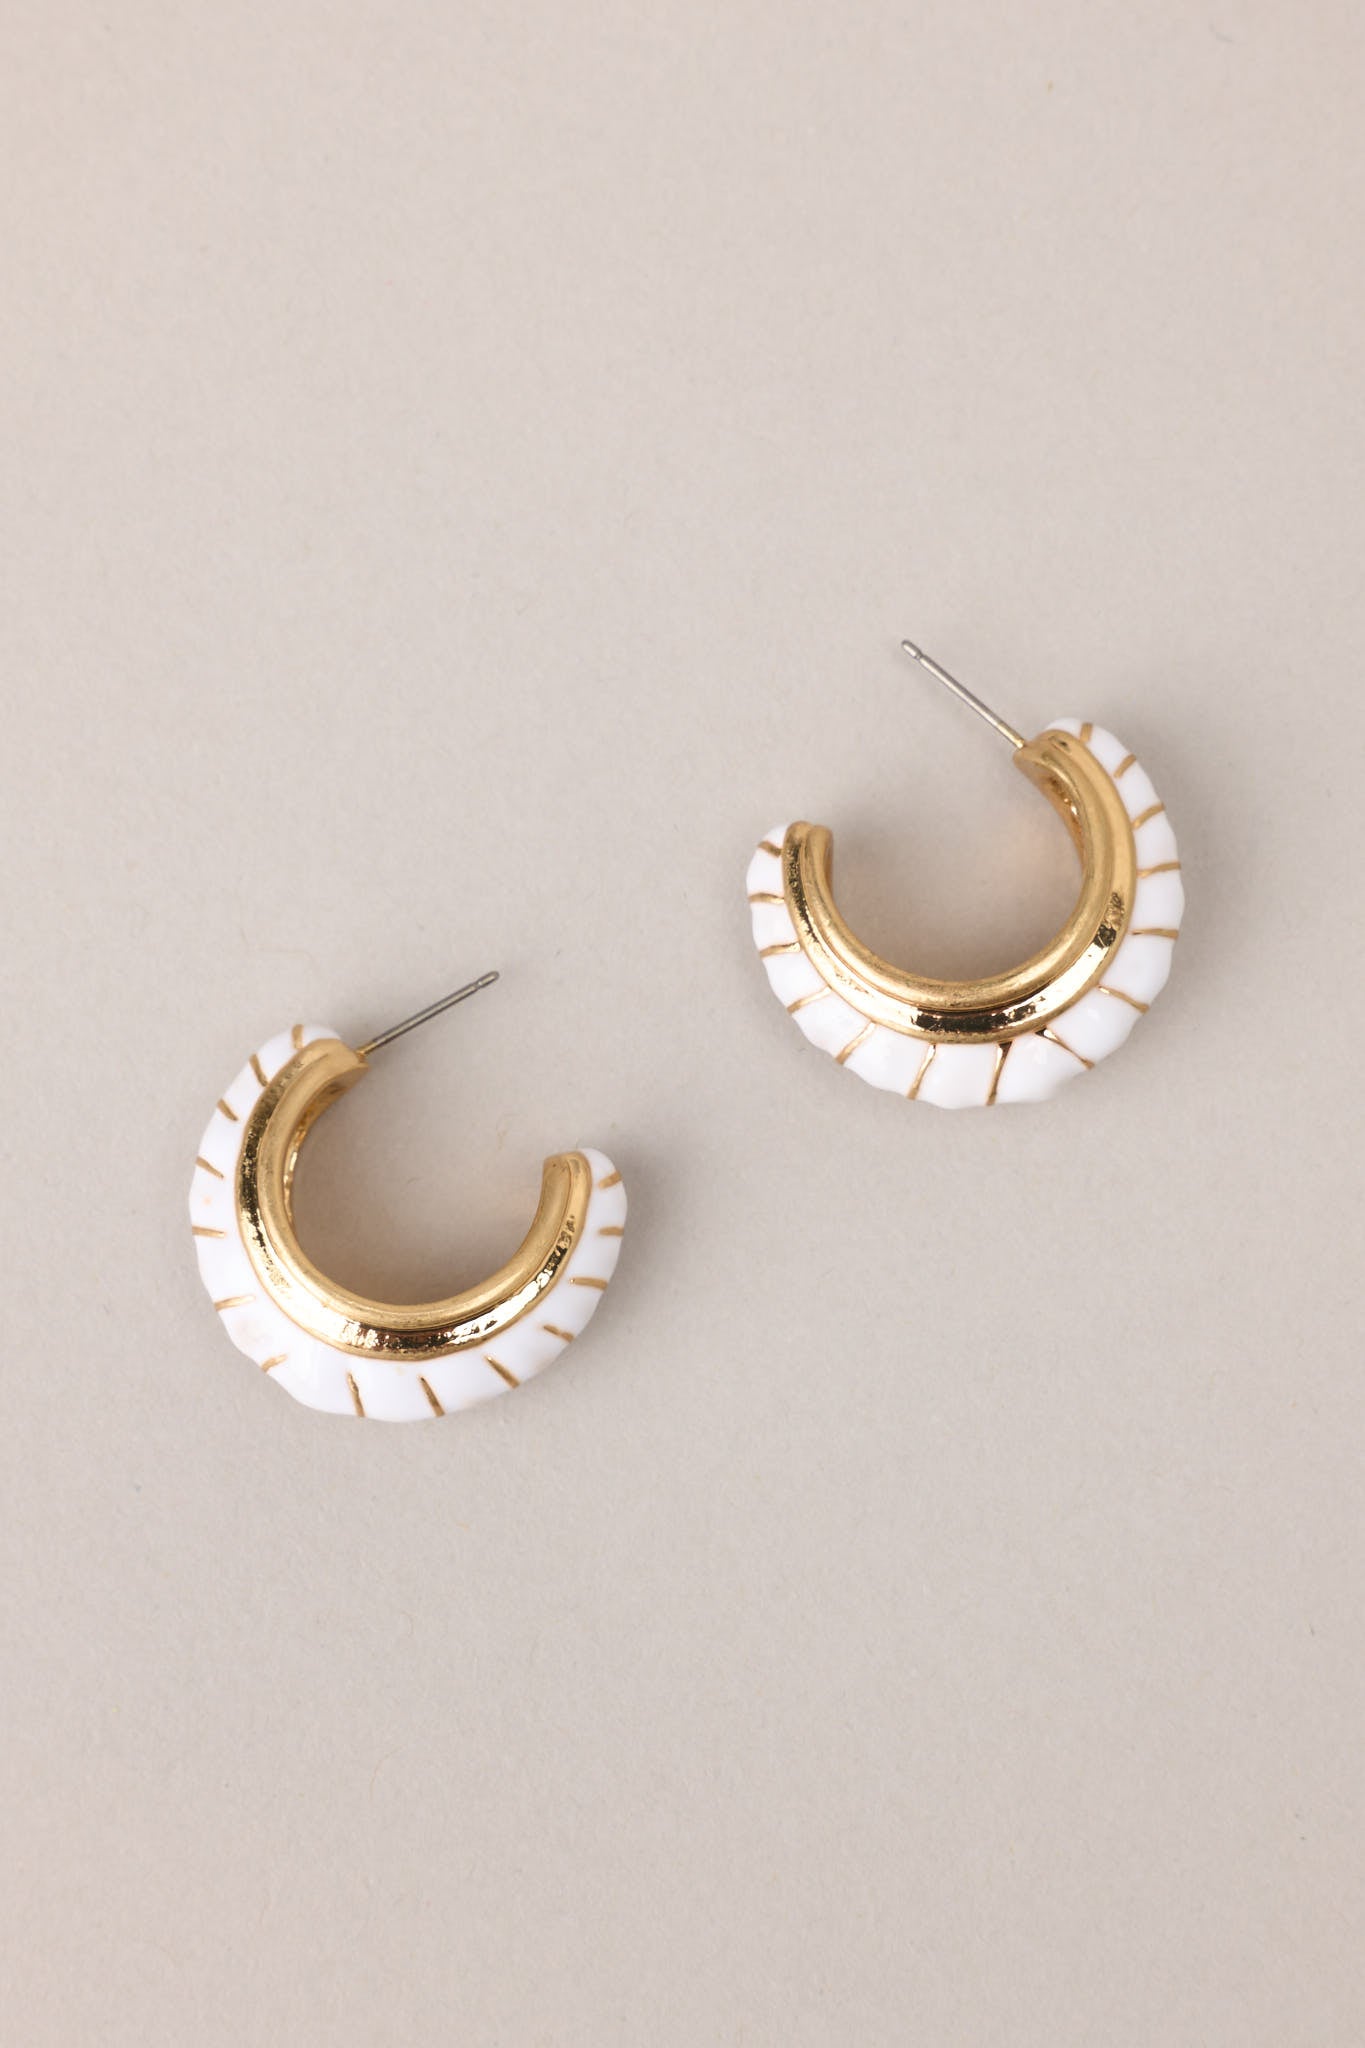 Overview of these gold earrings with white detailing, secure post backings.